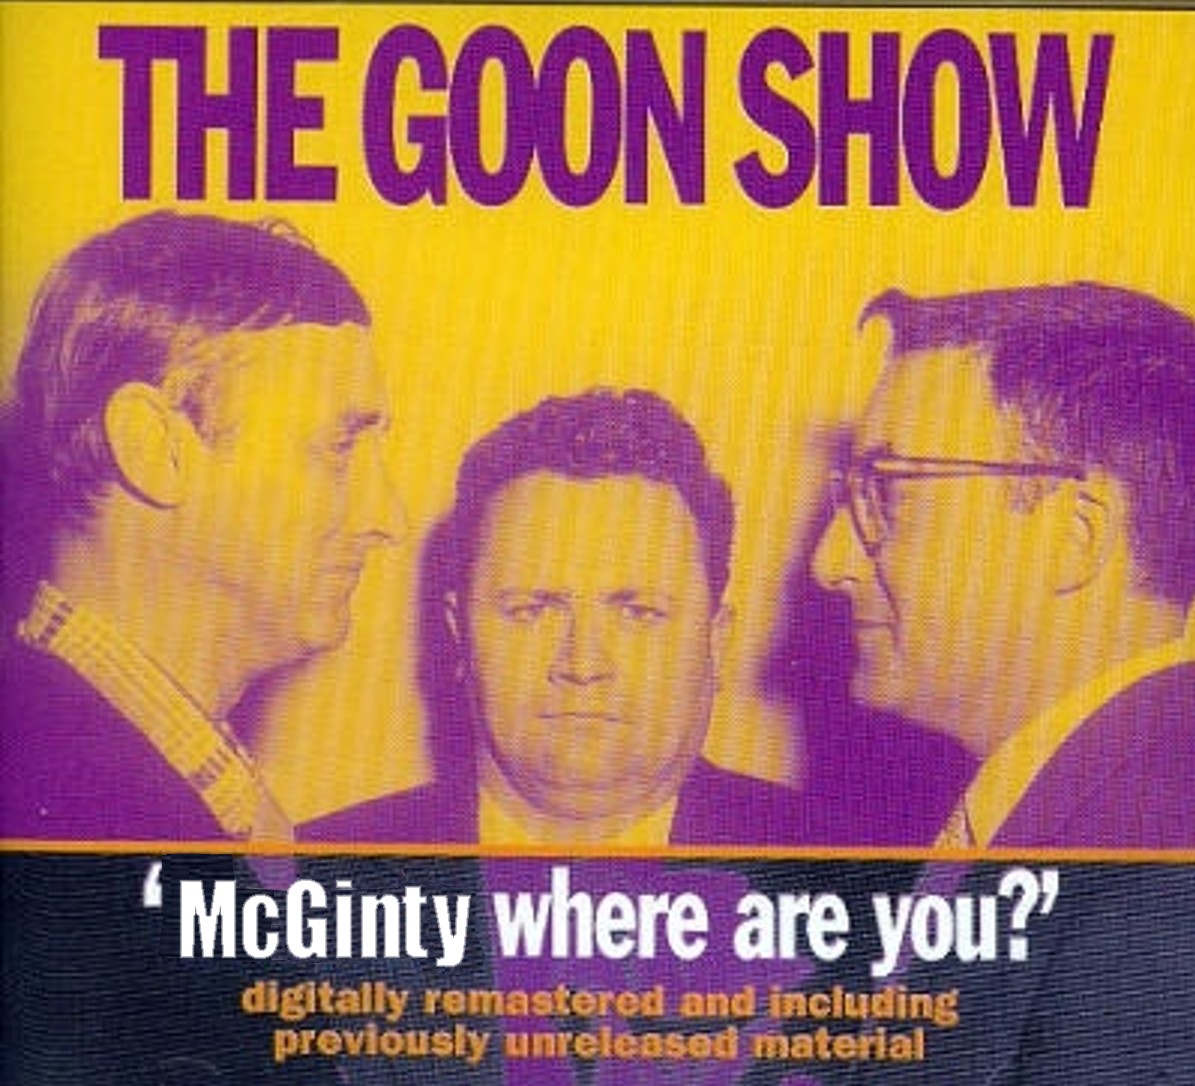 [McGinty+Where+are+You.jpg]